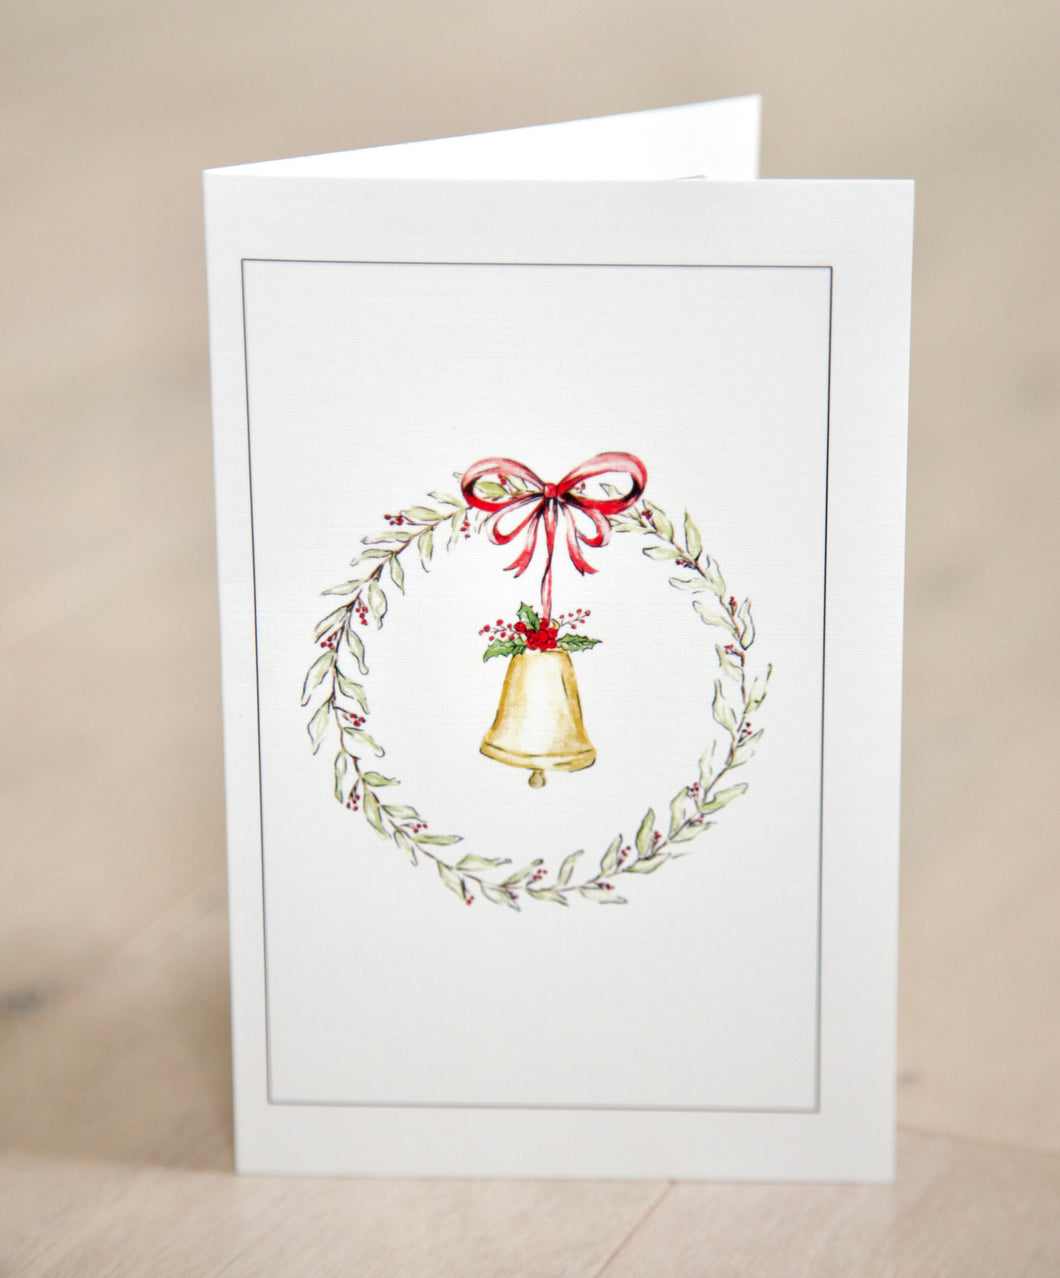 Evergreen Wreath with Red Bow and Christmas Bell - Watercolor Christmas Card